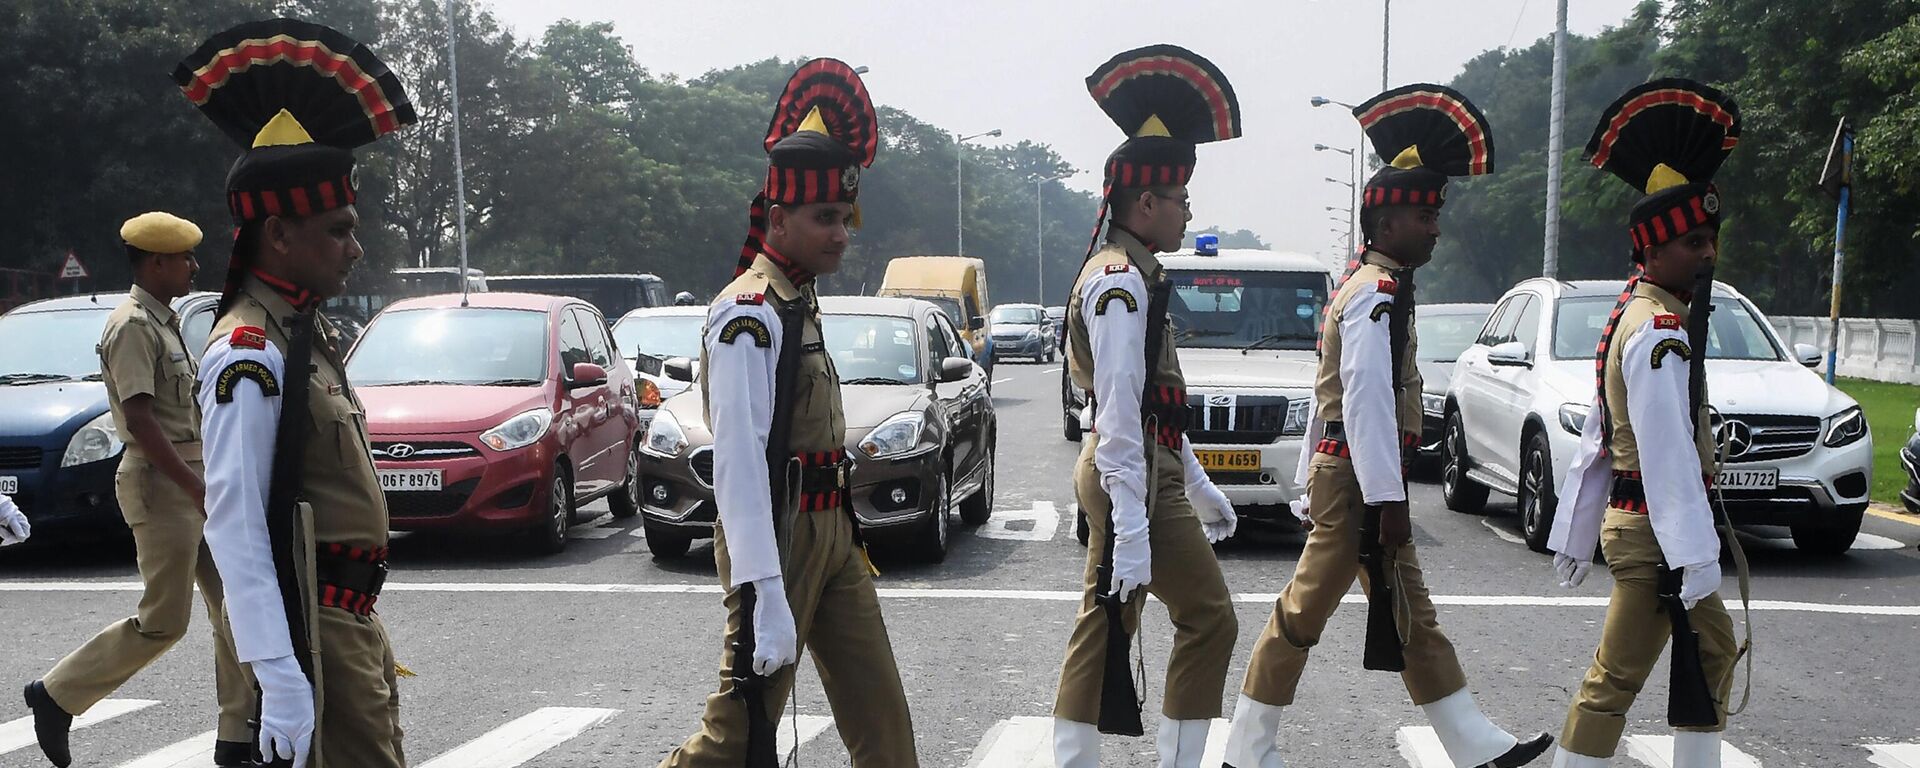 Officers of the Kolkata Armed Police walk cross a road after a function to mark the 76th anniversary of the establishment of the Azad Hind provisional government and independence army that became the Indian National Army, in Kolkata on October 21, 2019. - Sputnik India, 1920, 26.12.2023